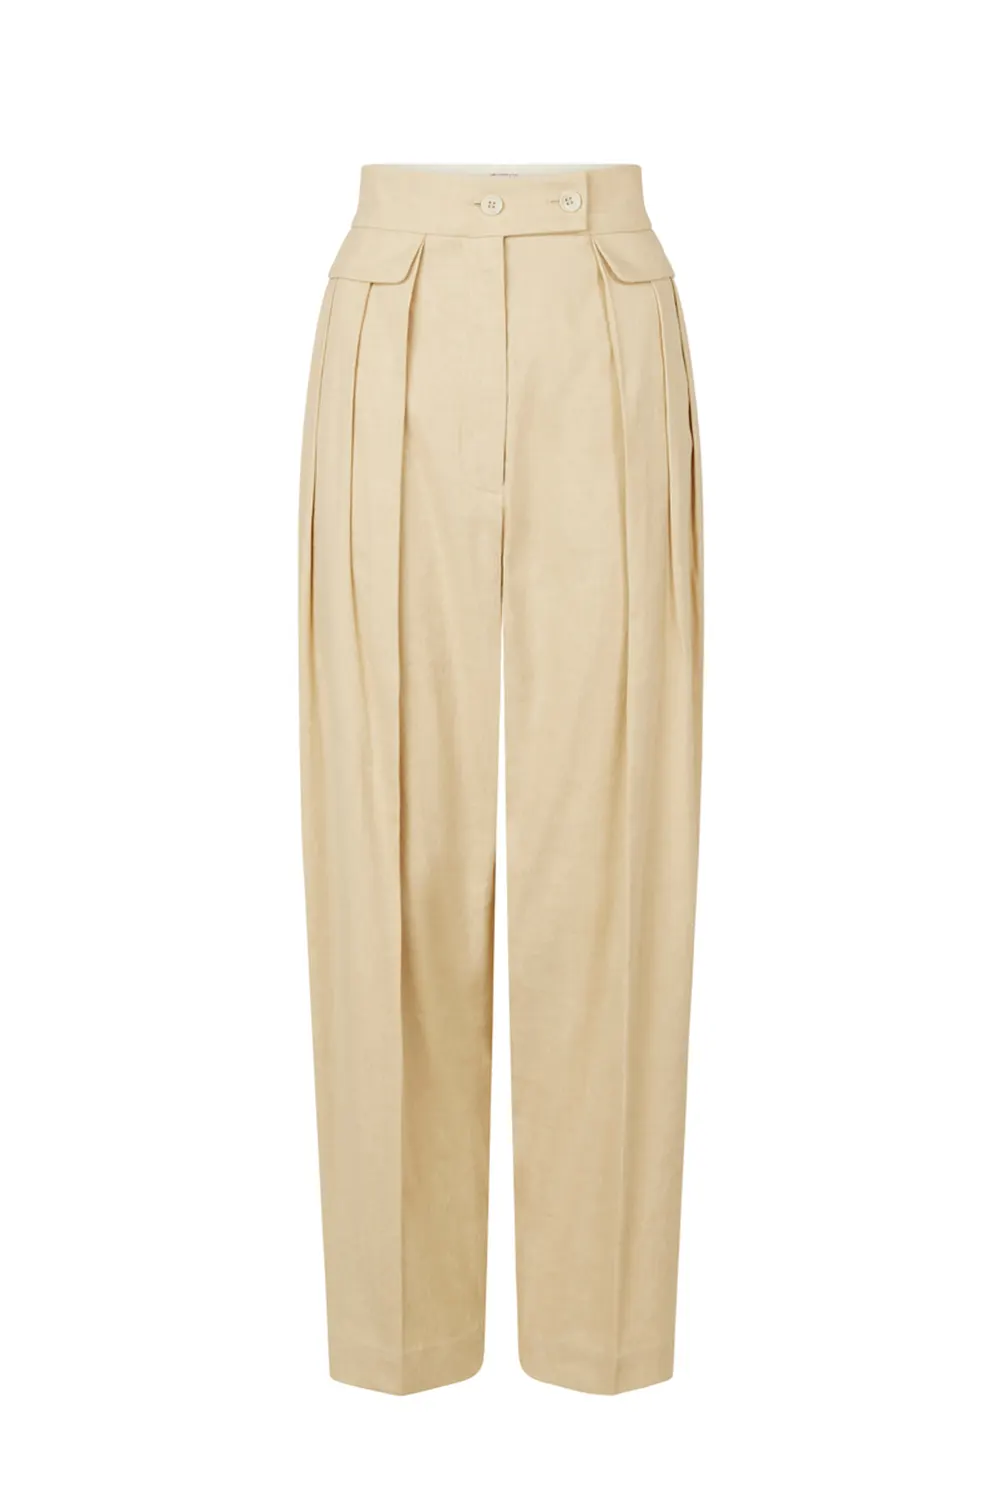 Oroton Linen cropped pant in cream